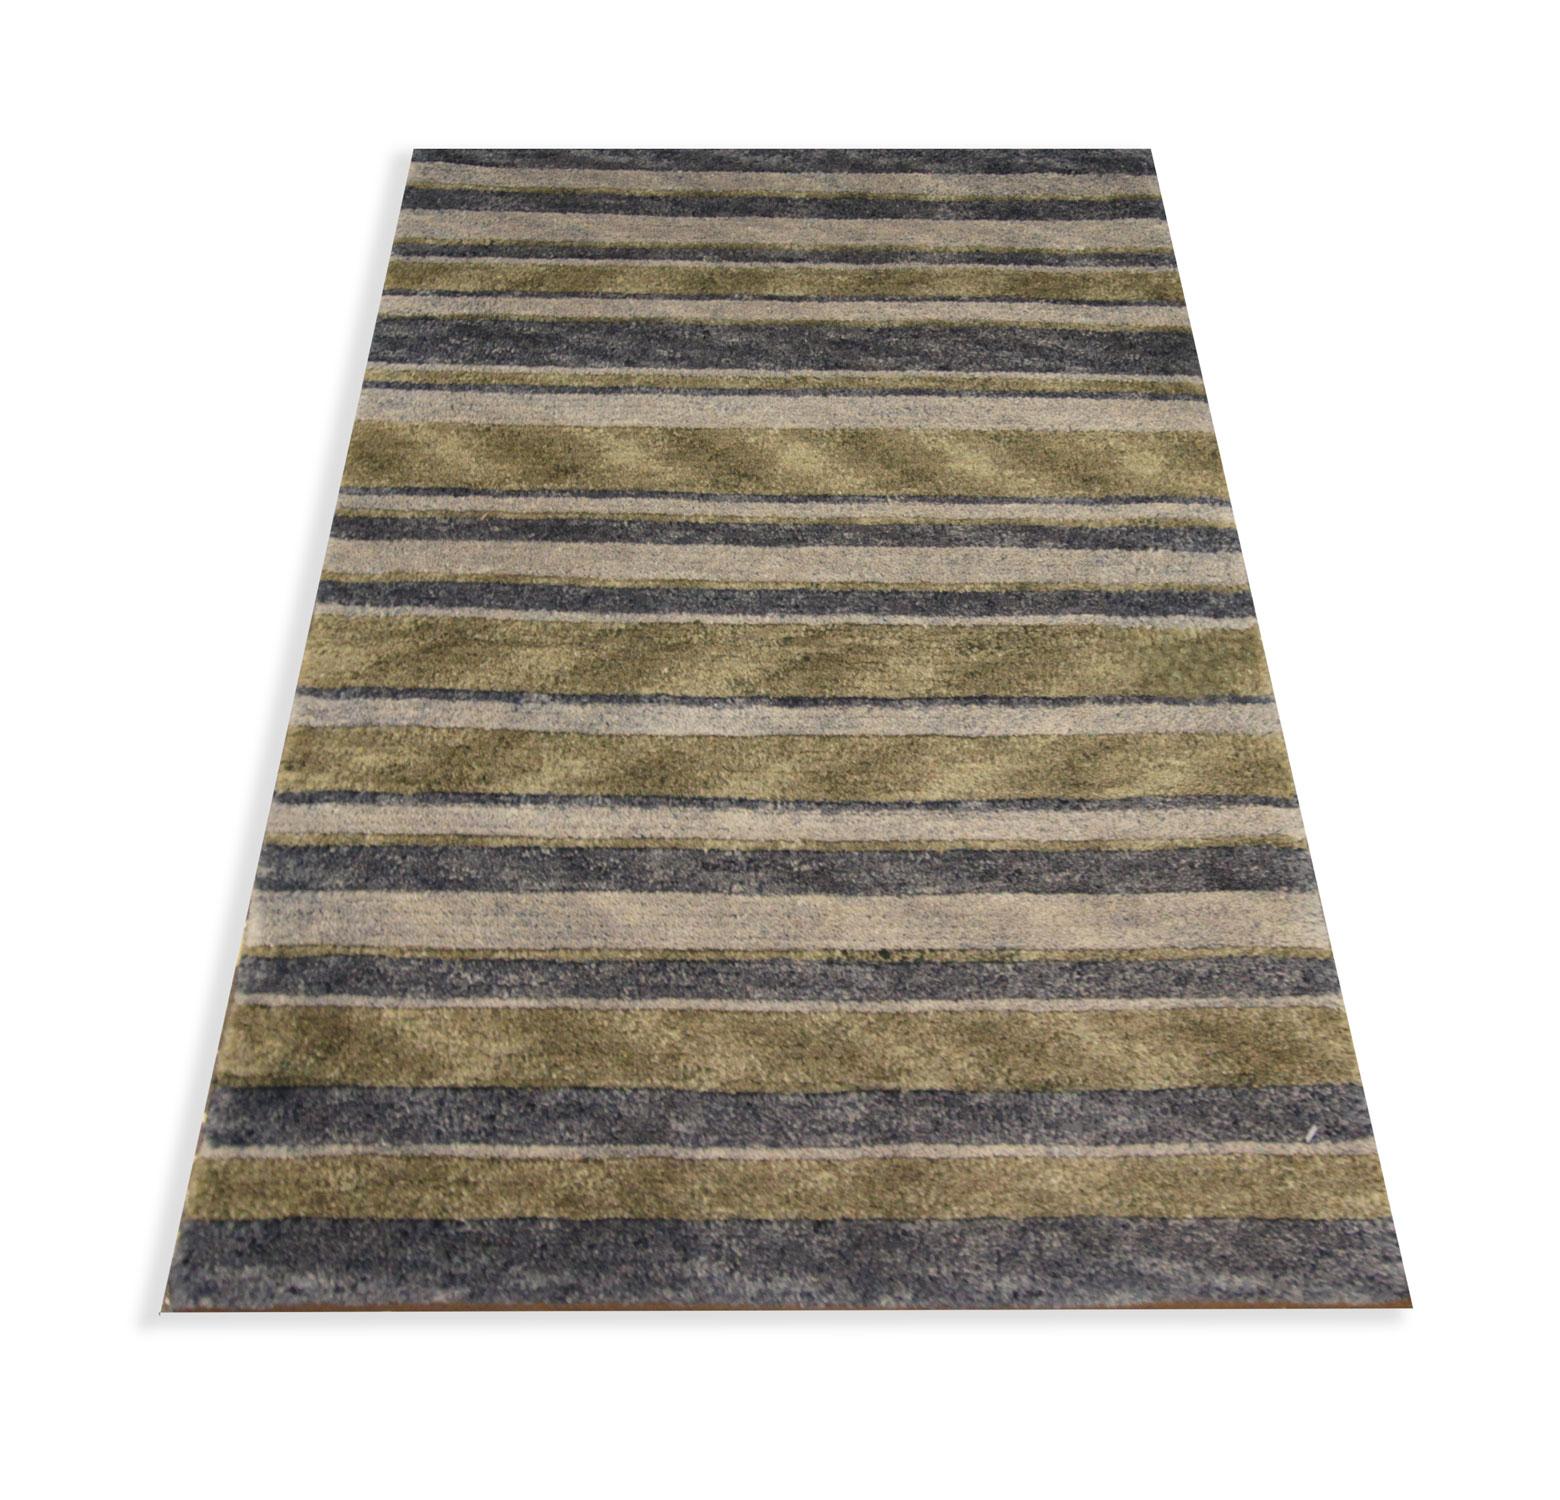 This handwoven wool area rug is a modern carpet woven with a simple stripe pattern. Featuring green and grey accent colours. The construction and materials used are of the highest quality, including hand-spun wool and cotton that has been